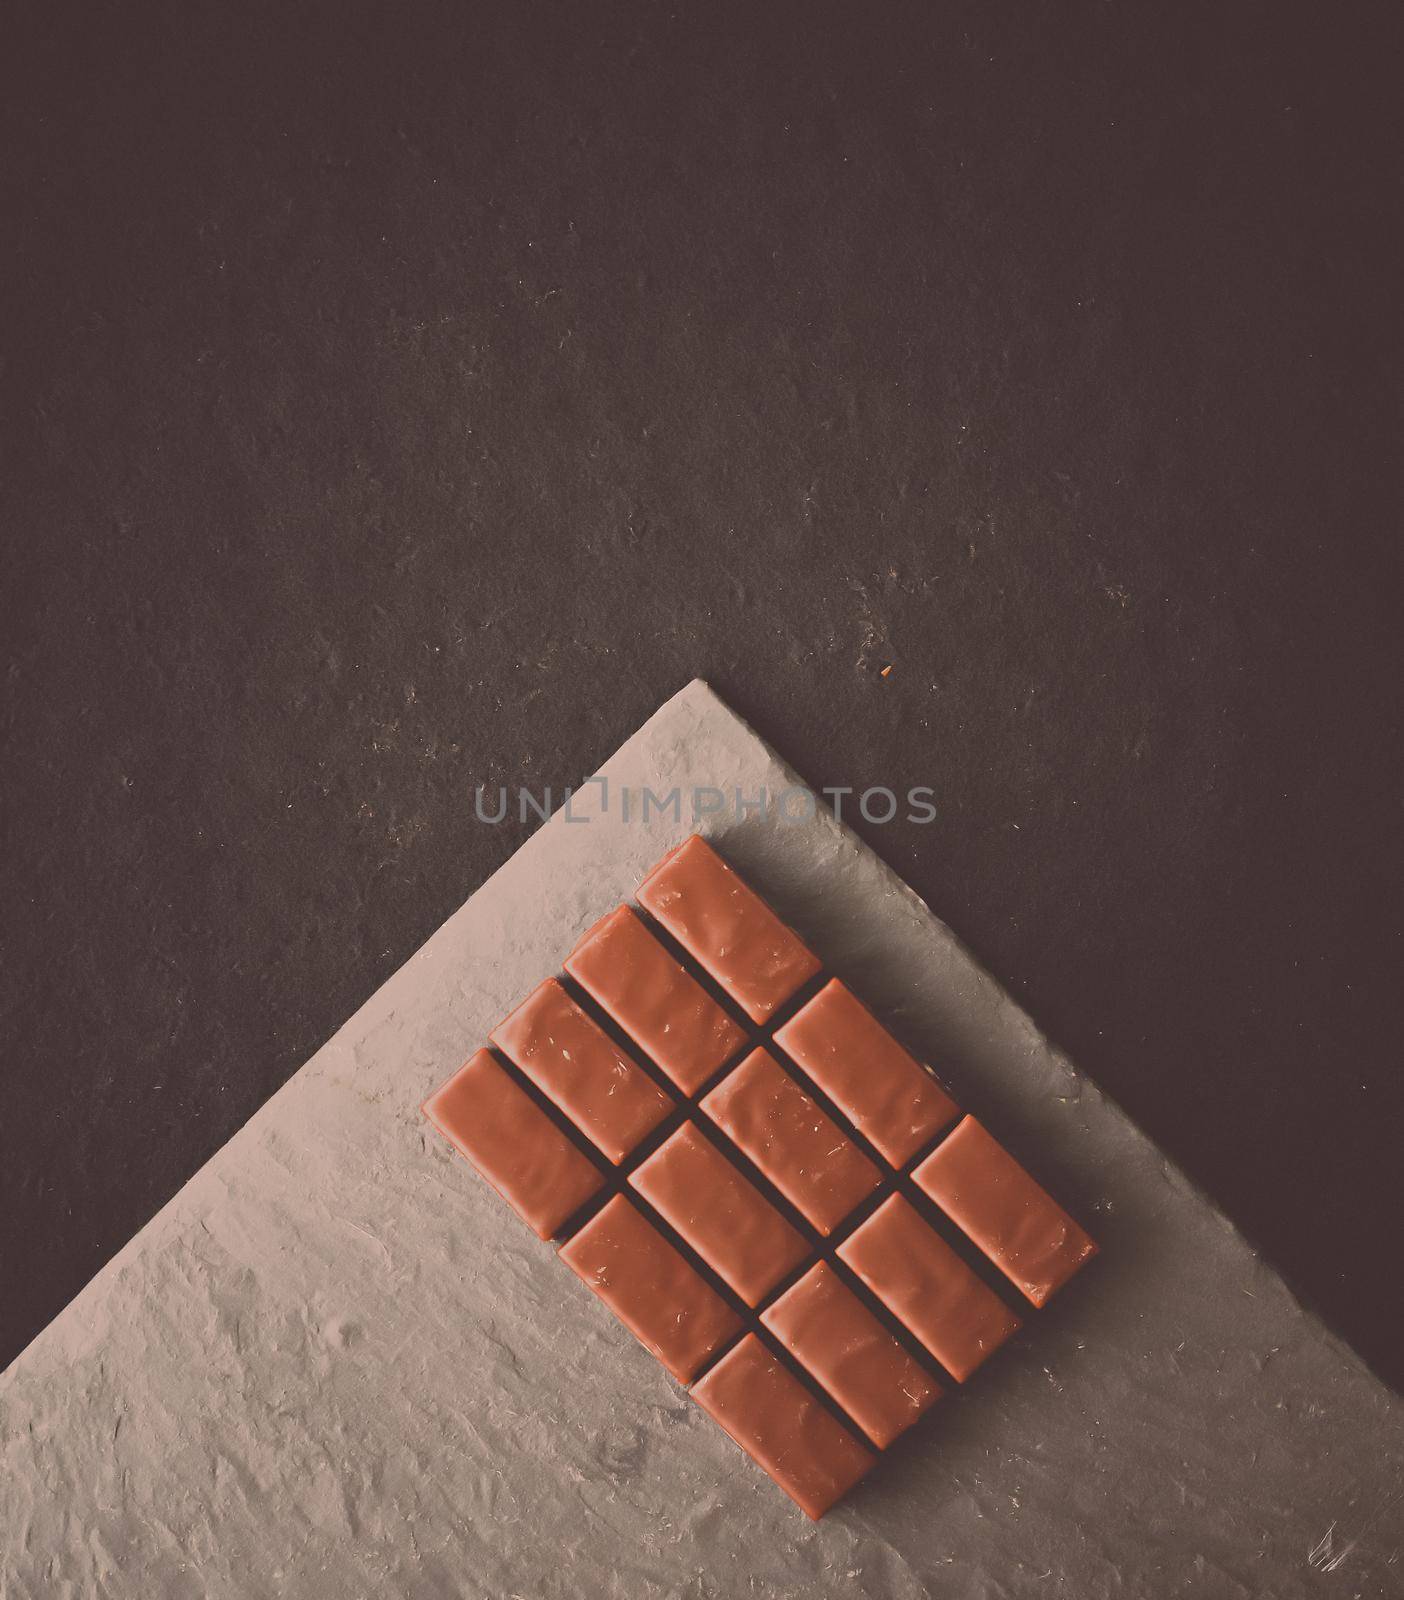 Sweet swiss chocolate candies on a stone tabletop, flatlay - desserts, confectionery and gluten-free organic food concept. All you need is chocolate